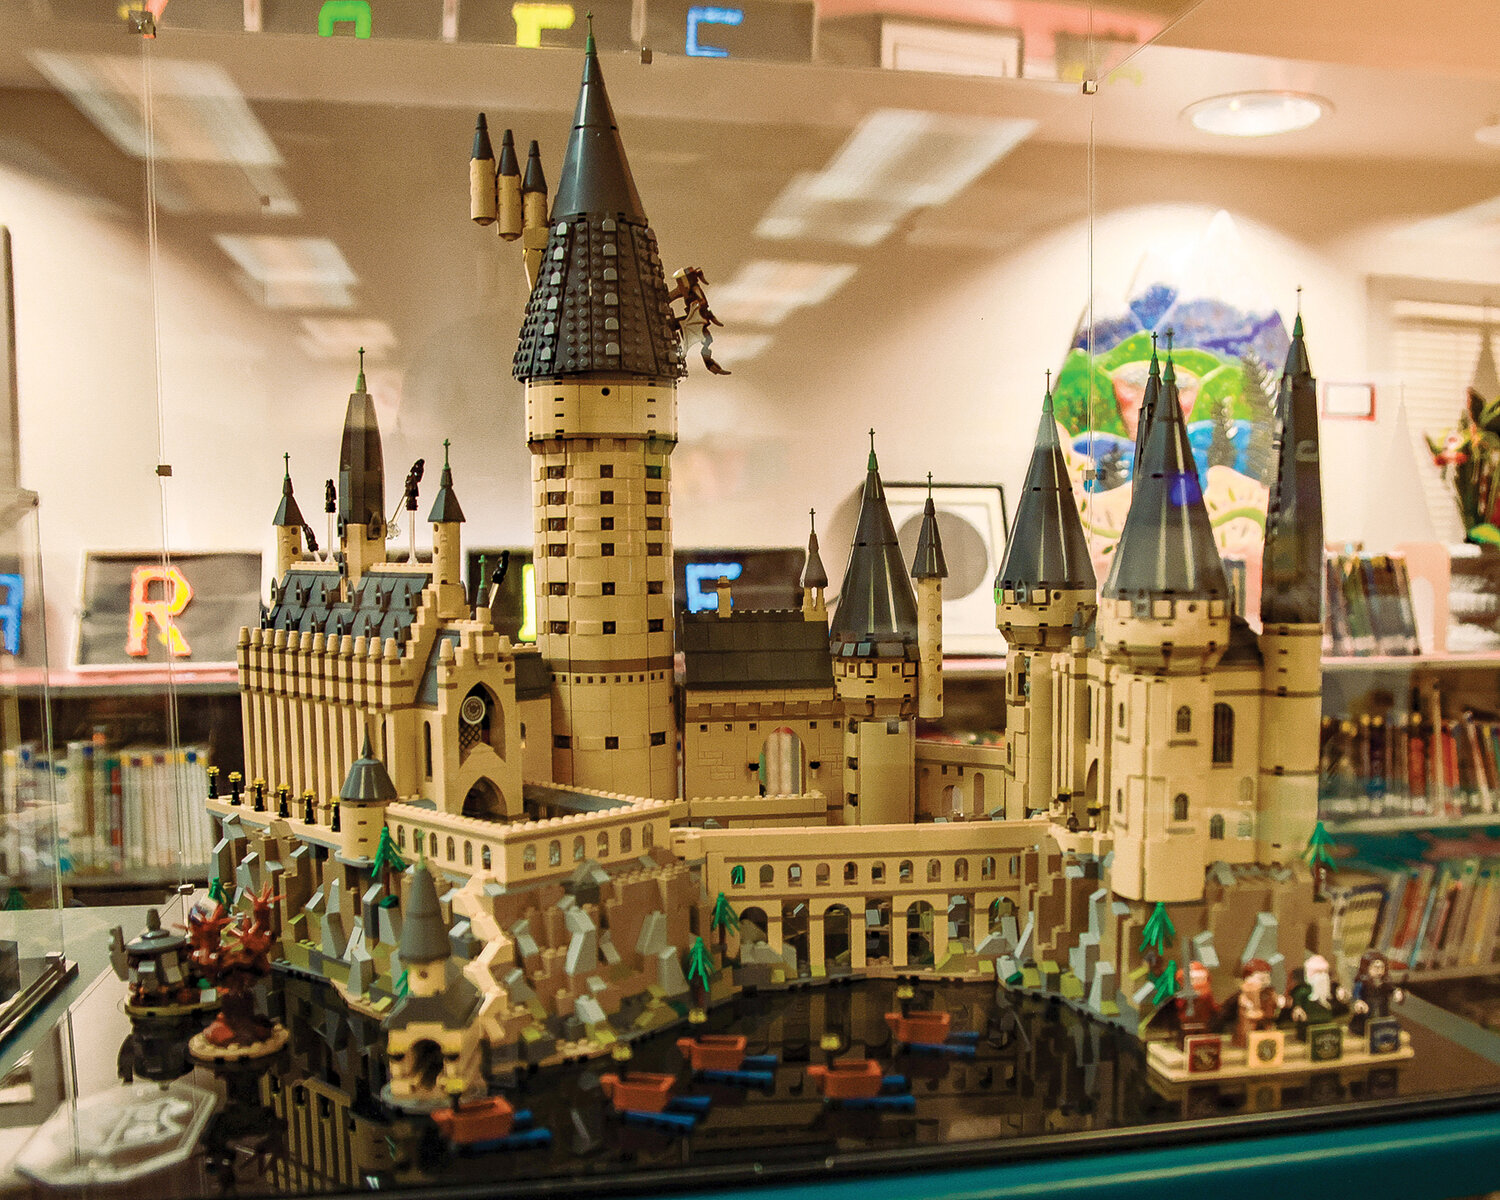 The Lego Harry Potter, Hogwarts Castle is one of Ted Schelvan’s many builds on display in the Captain Strong Primary School’s library, seen on Wednesday, May 3.